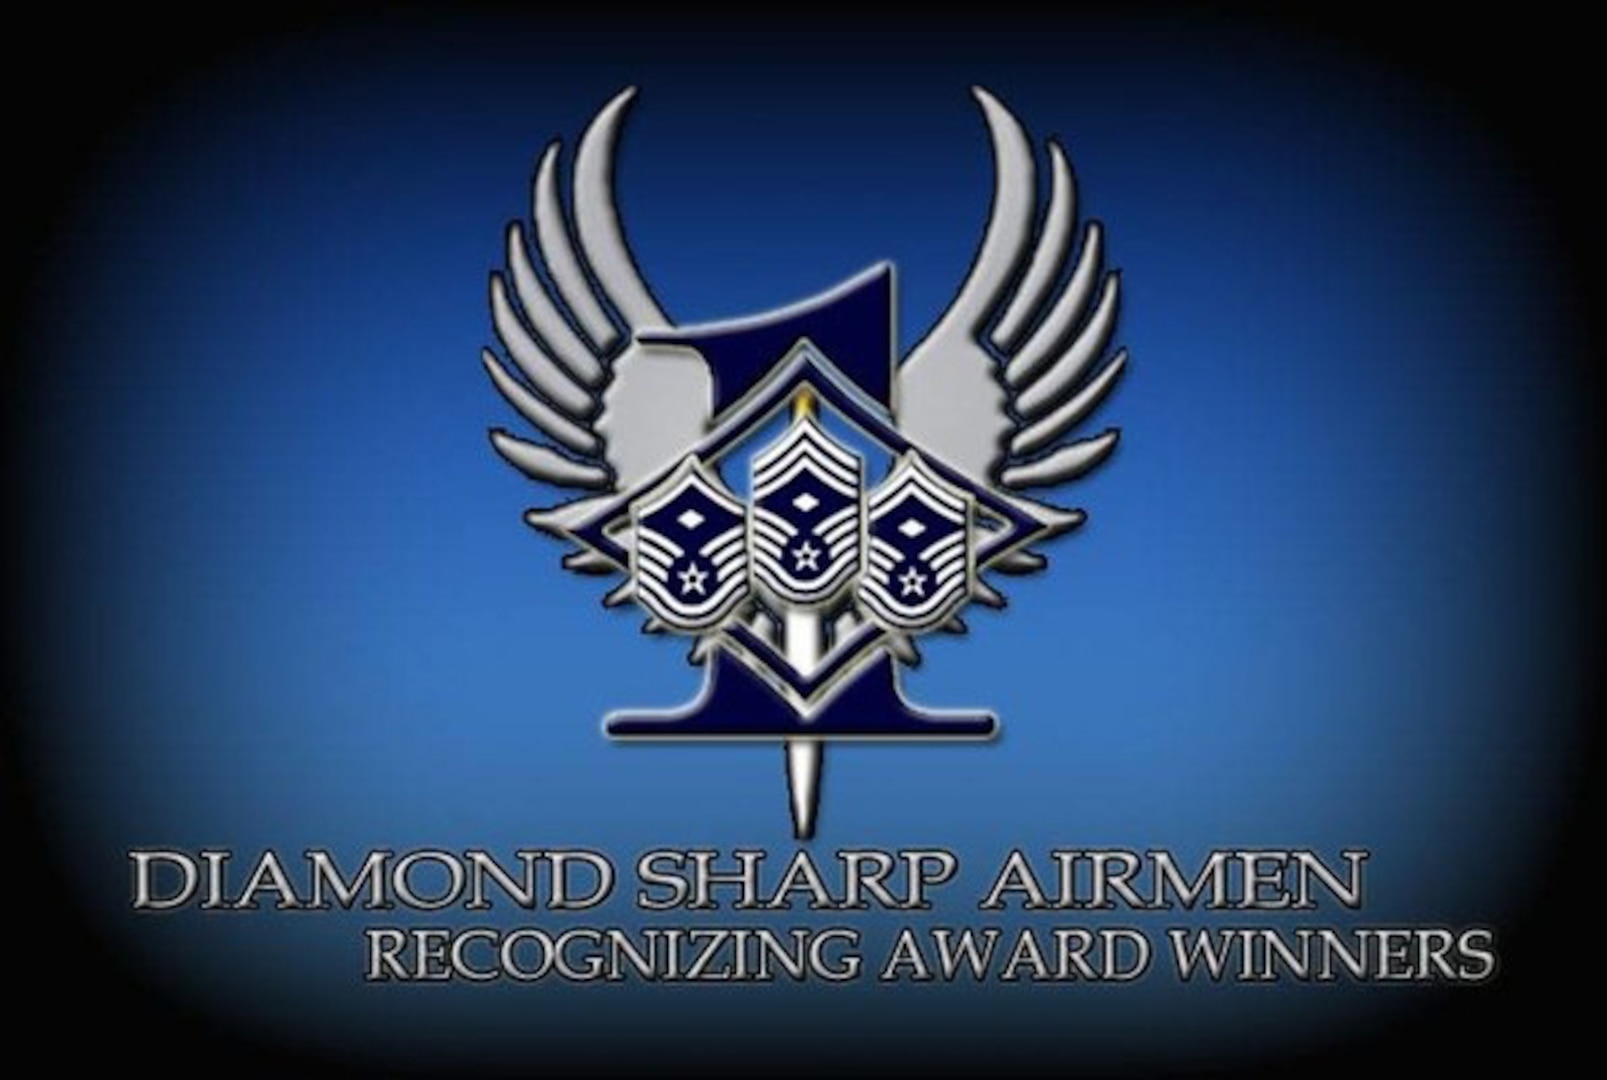 Graphic with wings and rank patches.